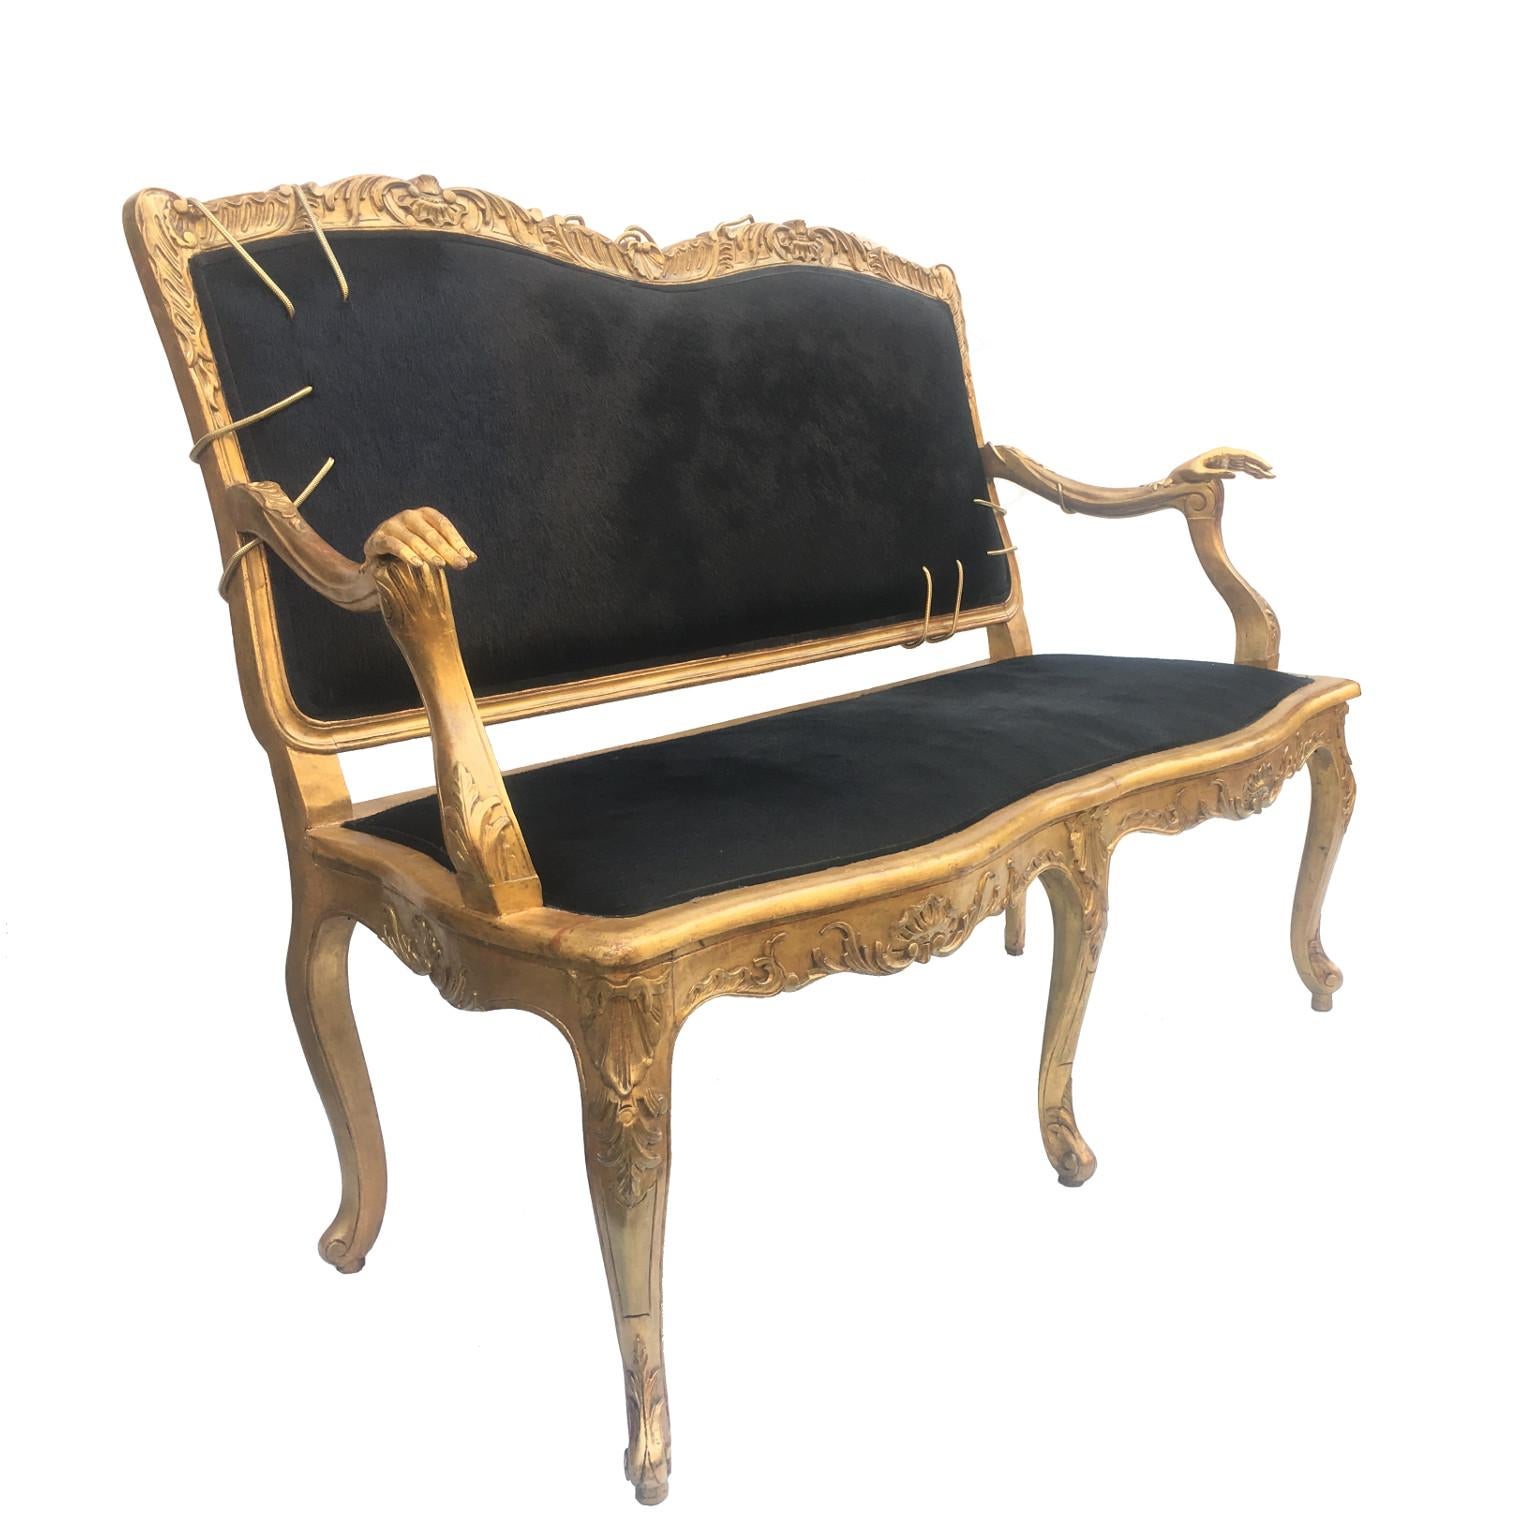 Golden Hands sofa, is a one-of-a-kind piece designed and realized by Giampiero Romanò that mixes together the elegance of an antique gilded sofa and the extravagance of the artist.
Originally it entered in the workshop of Giampiero as a French two